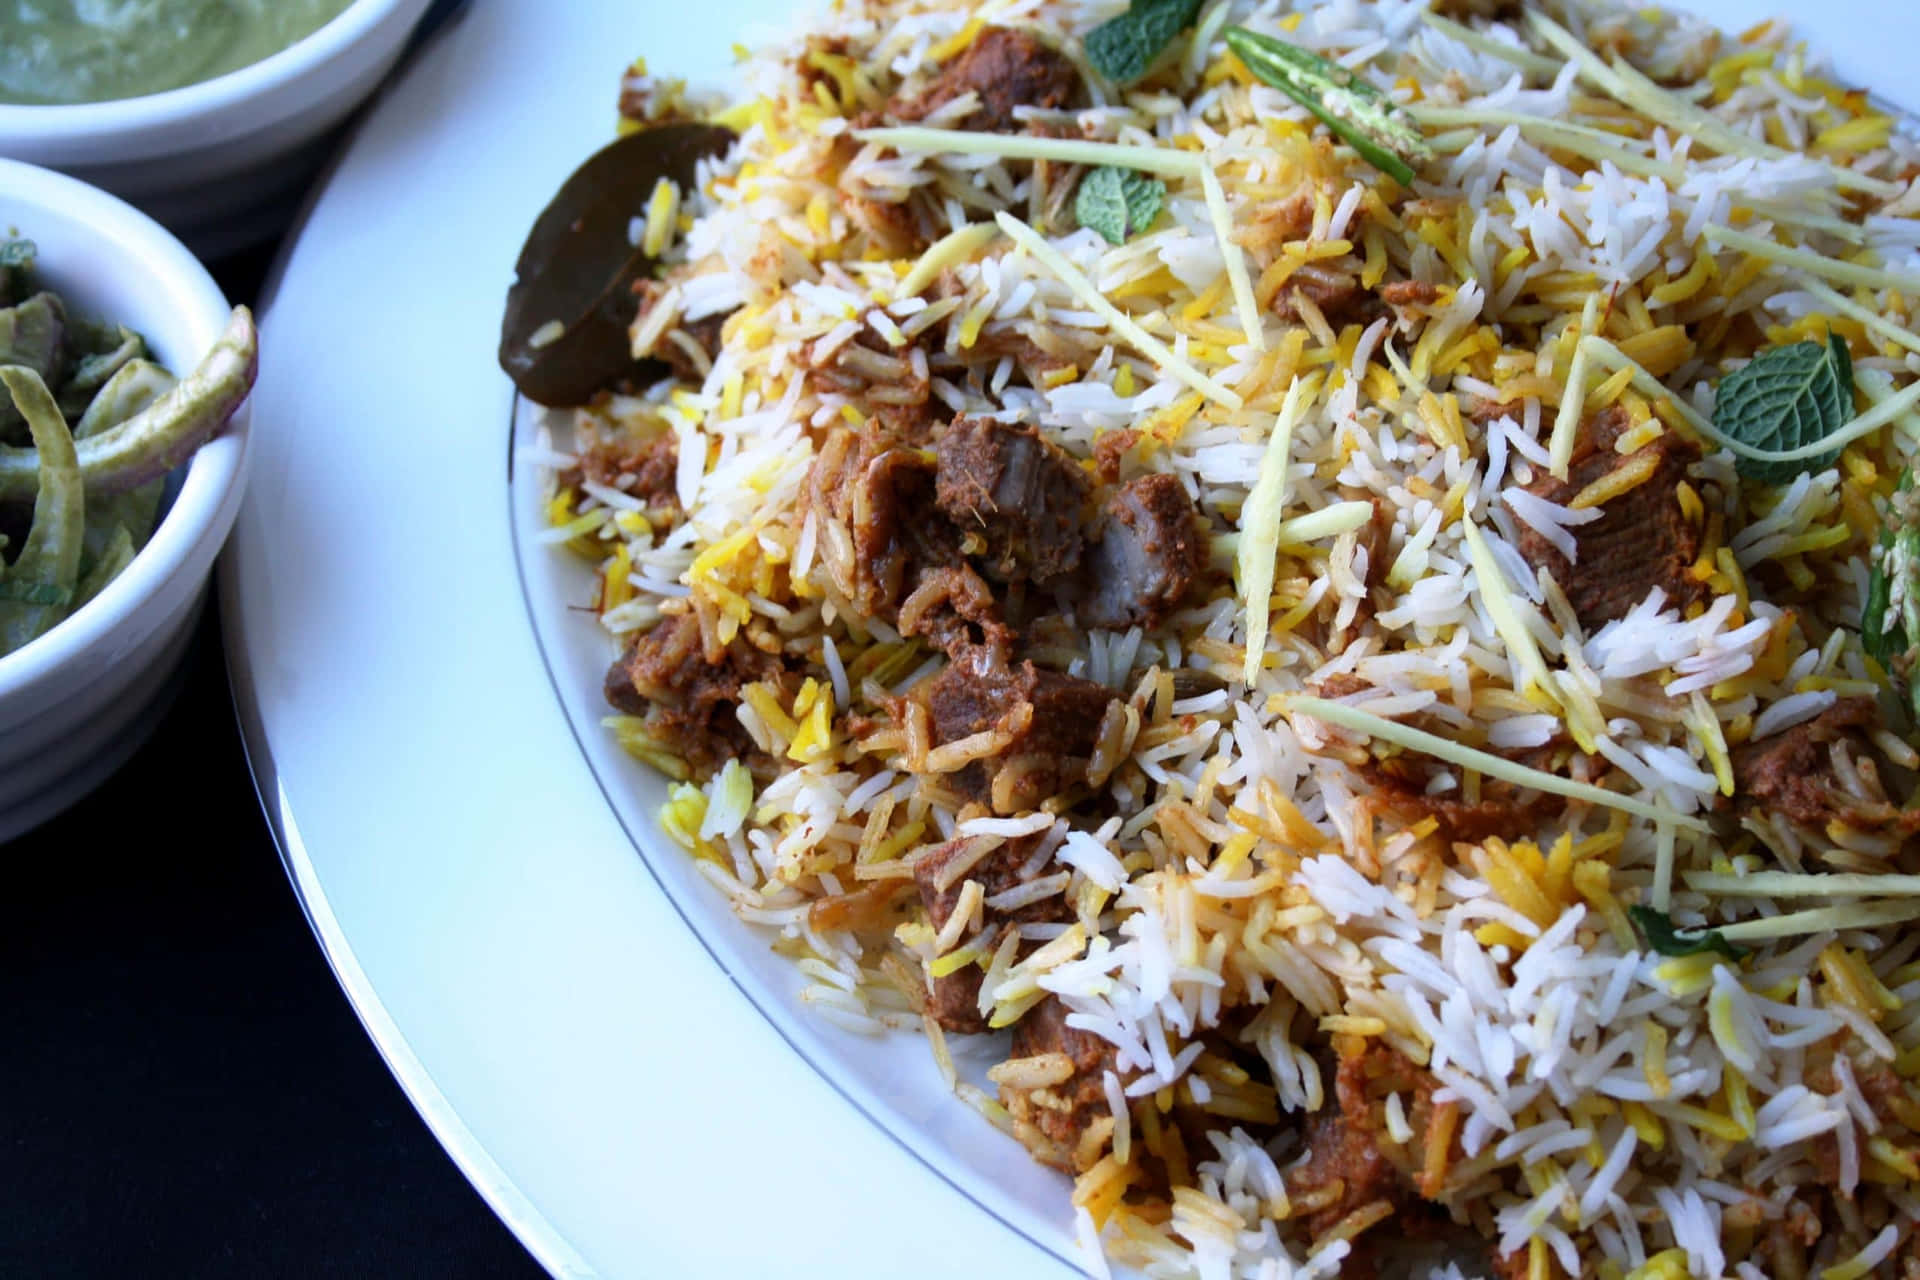 A delicious serving of Biryani on a plate